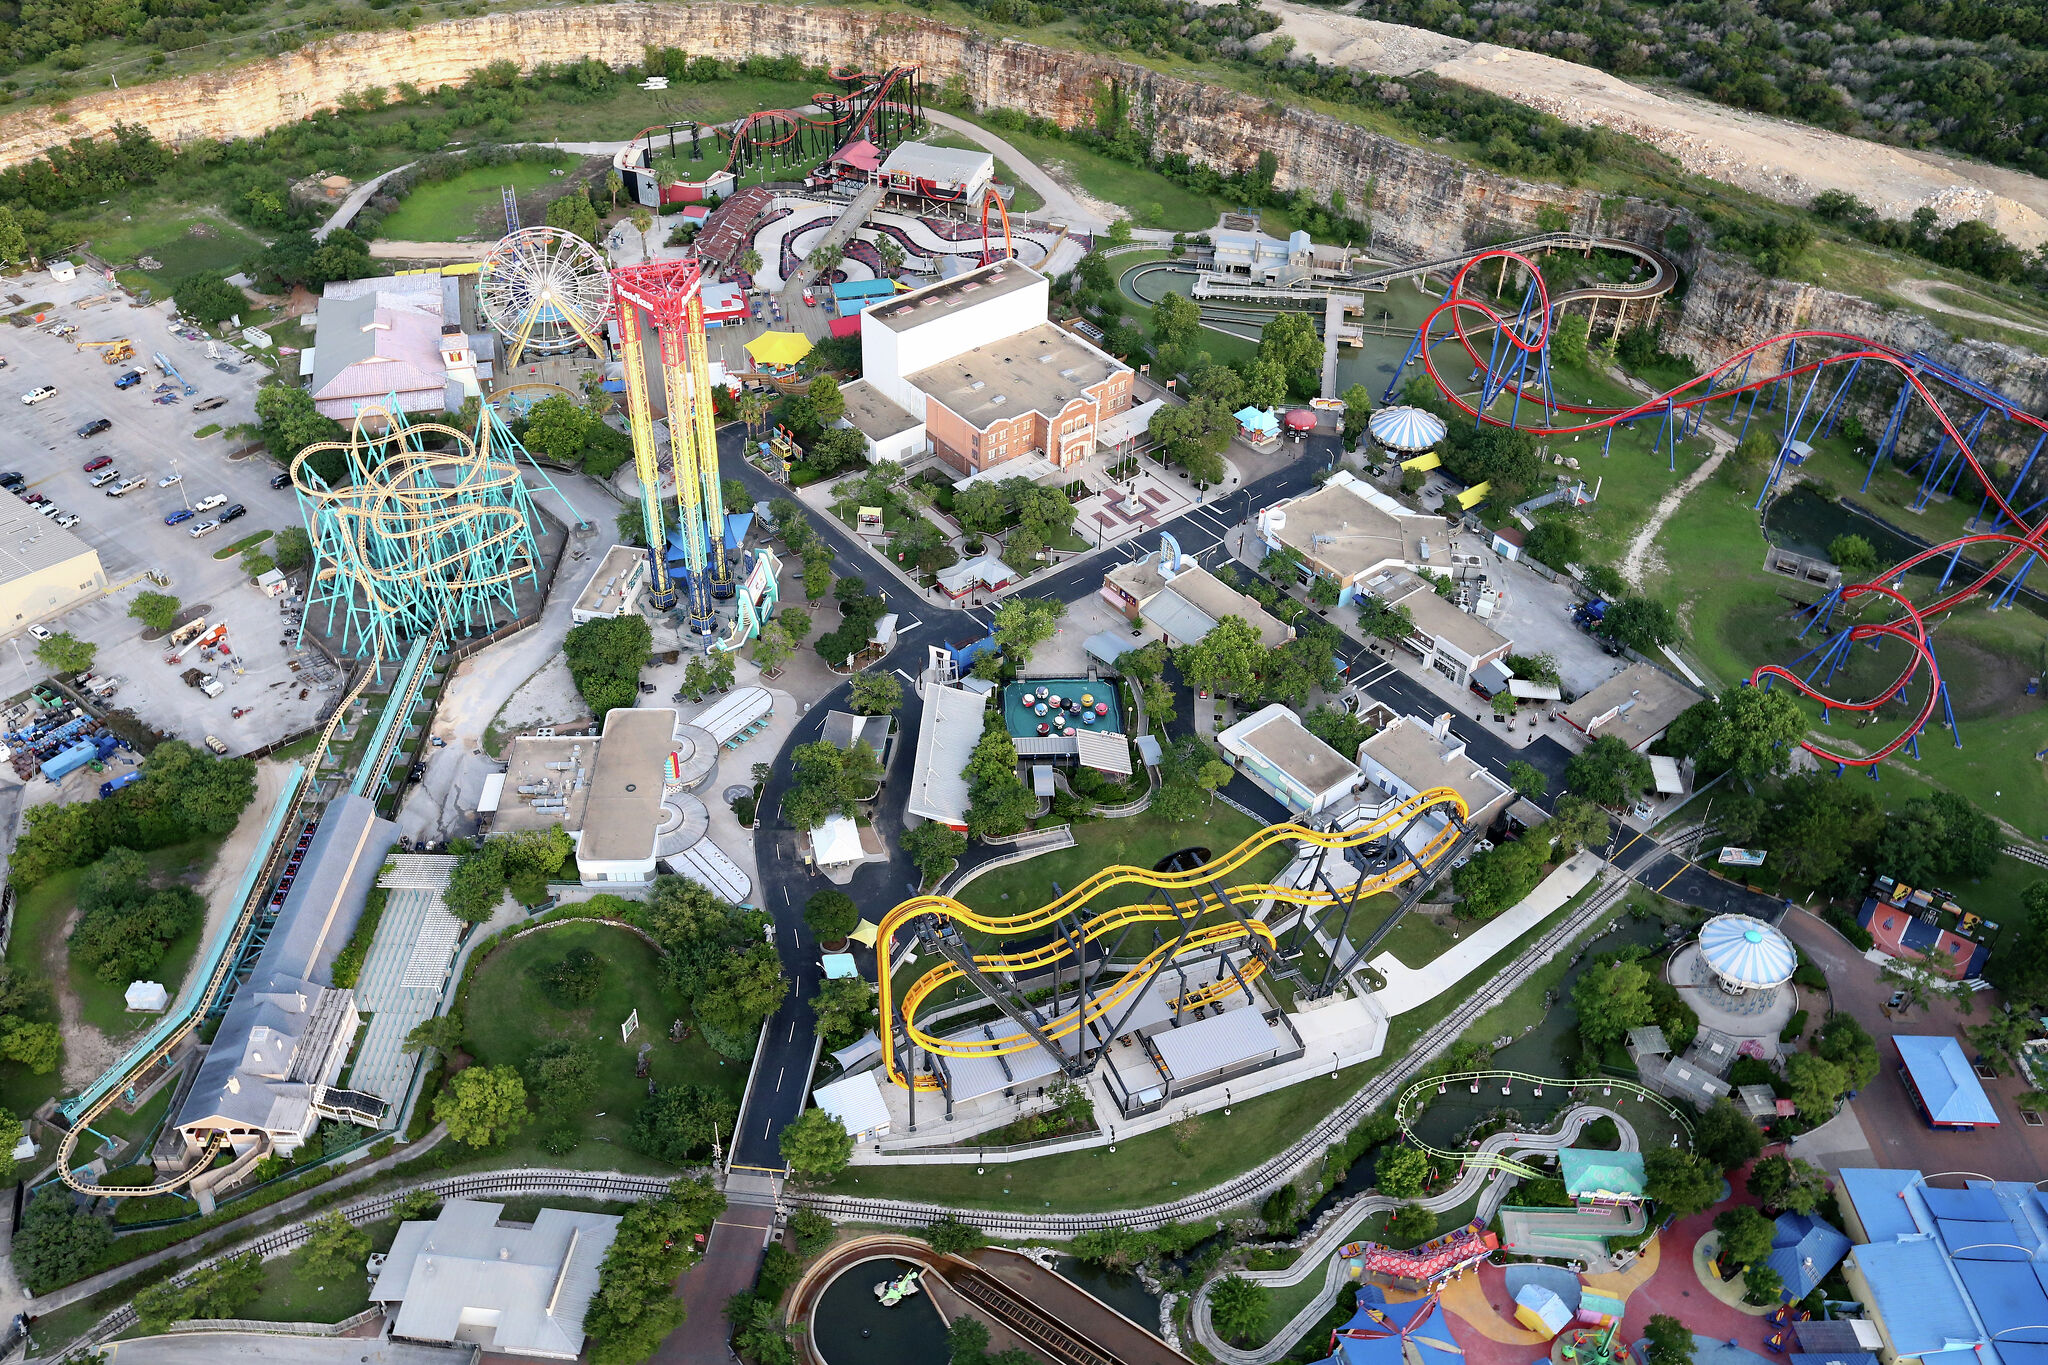 Six Flags Fiesta Texas Is Adding Three New Rides To The Park